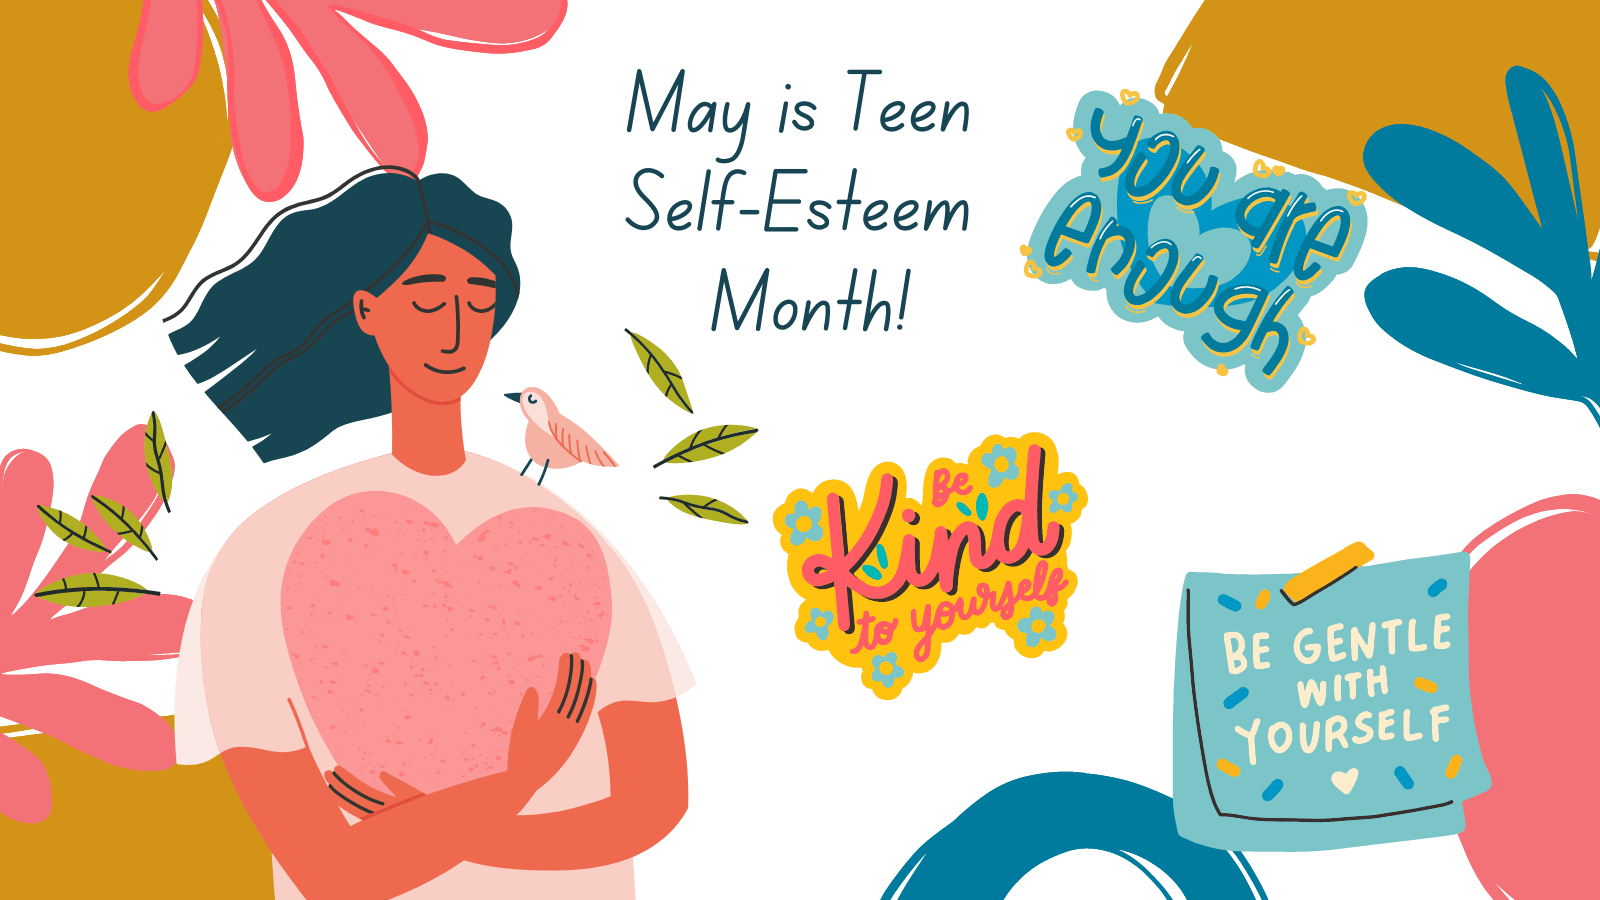 Focus on Lifting Up Teens' Self-Esteem During May